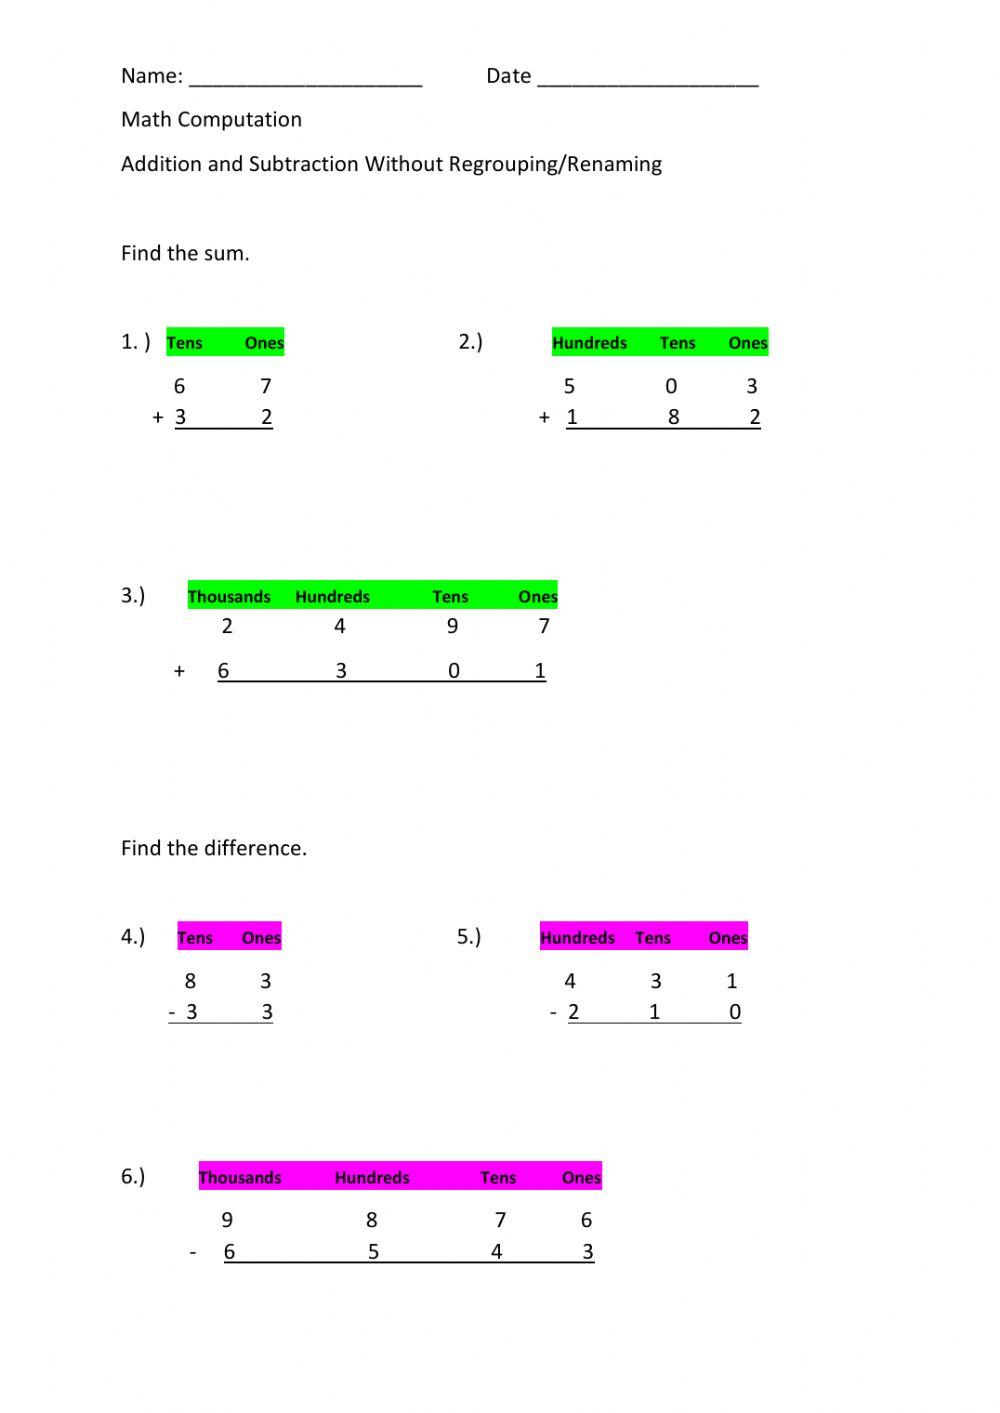 Addition and Subtraction Without Regrouping